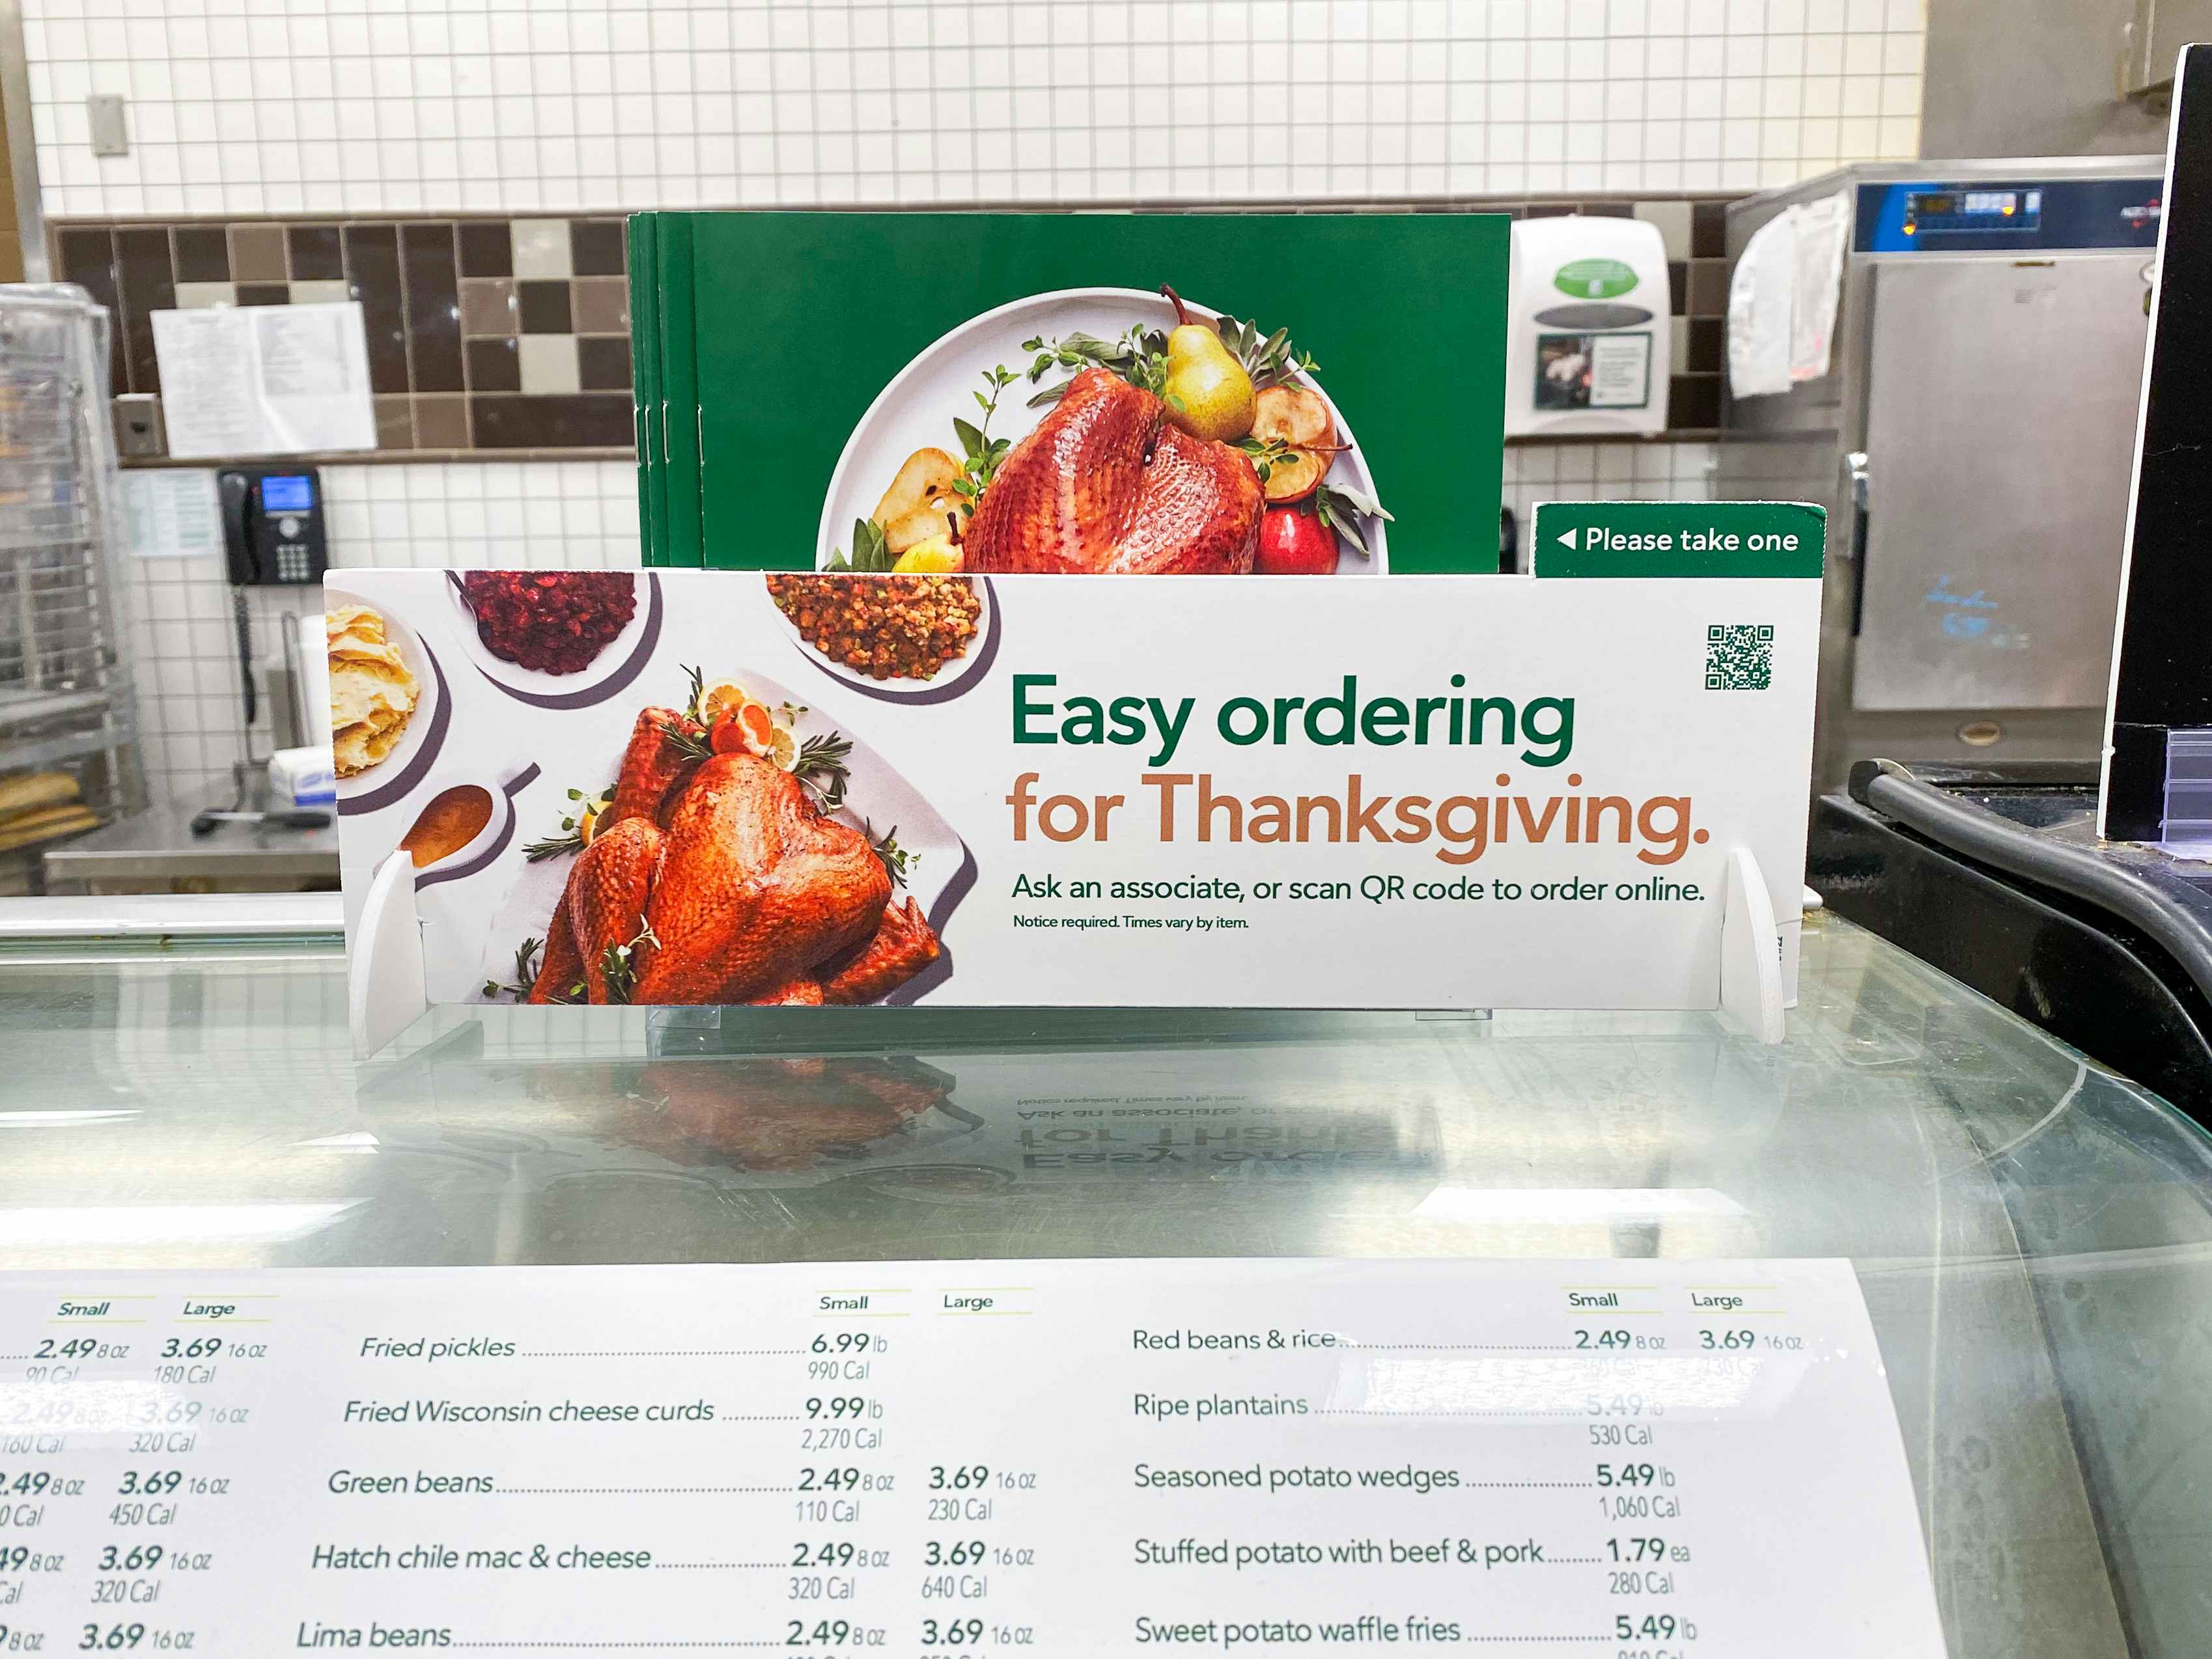 https://prod-cdn-thekrazycouponlady.imgix.net/wp-content/uploads/2022/10/publix-thanksgiving-holiday-meal-dinner-ordering-deli-2022-01-1668454534-1668454534.jpg?auto=format&fit=fill&q=25